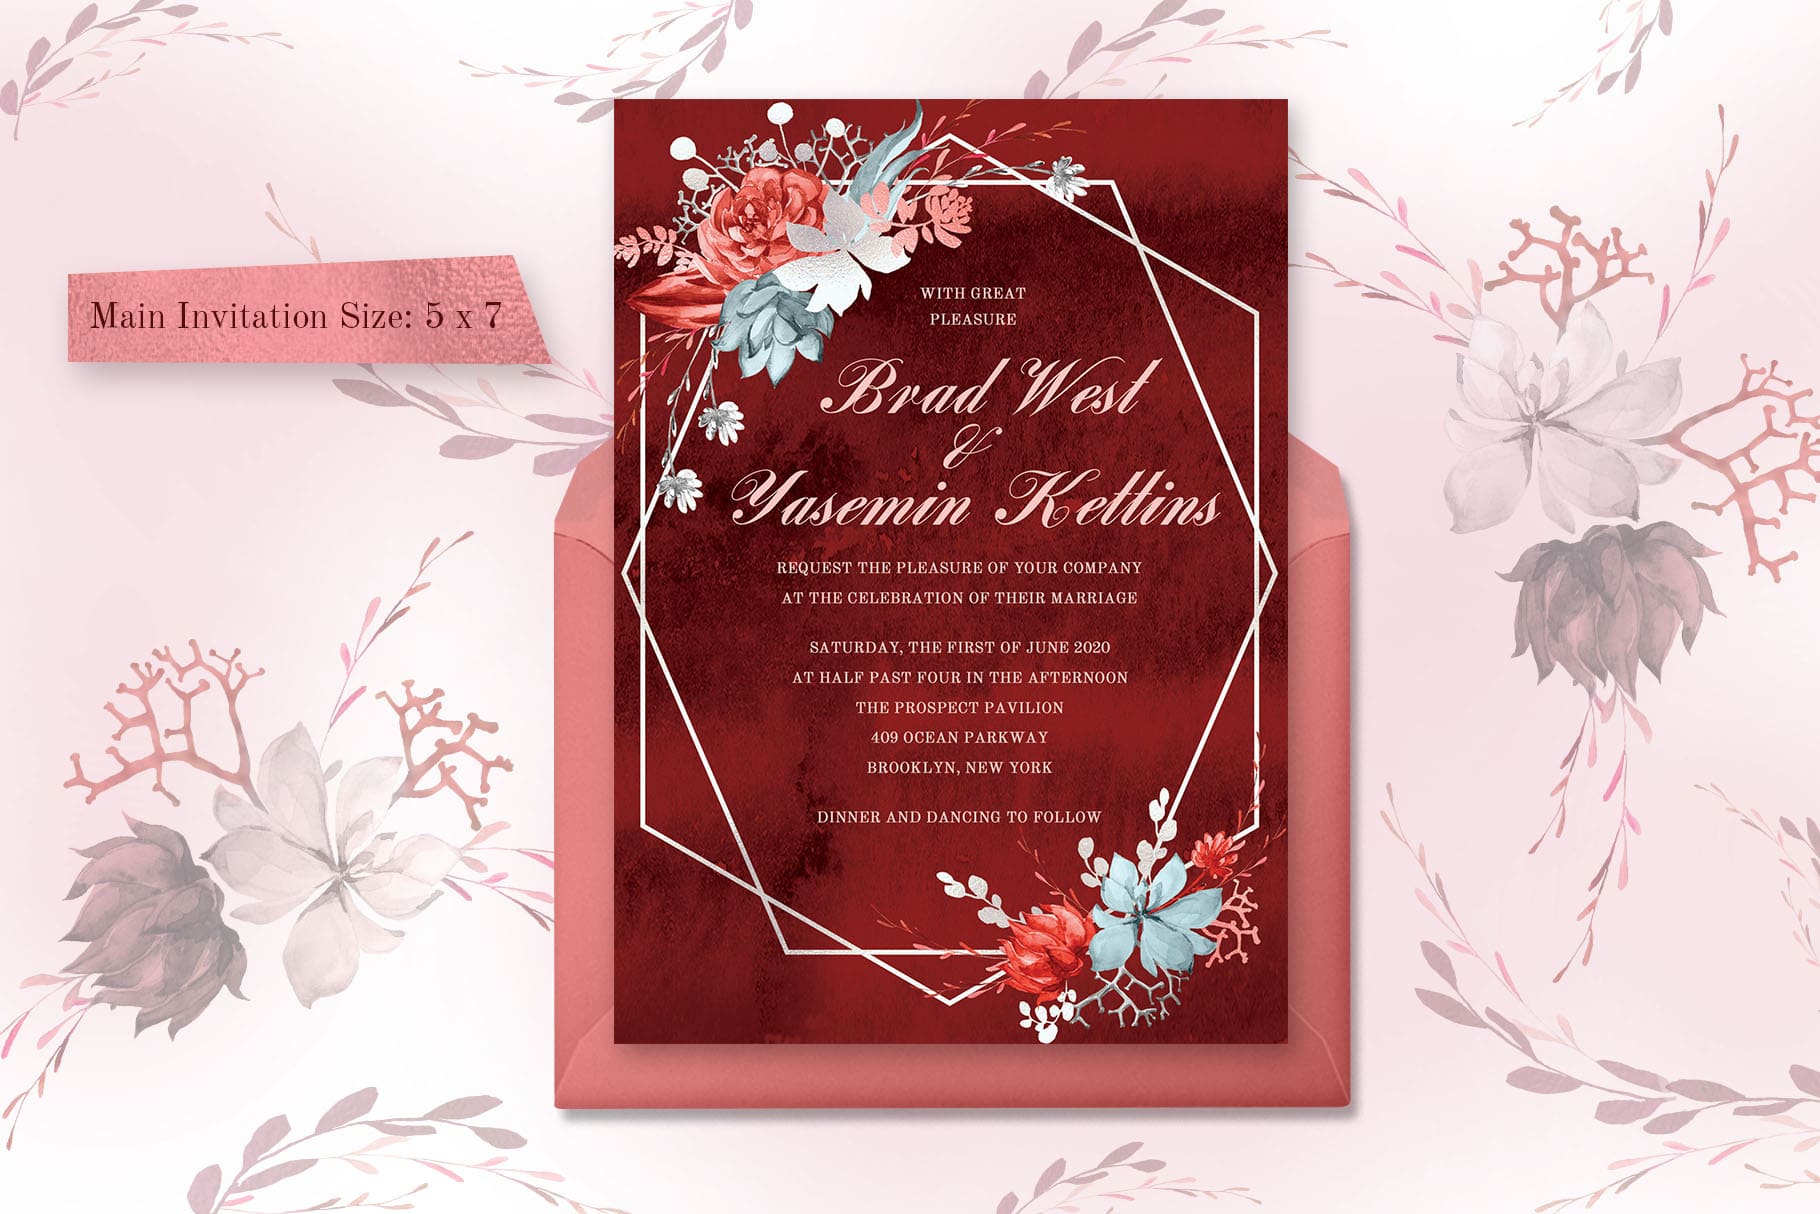 Nice invitation collection for your wedding.